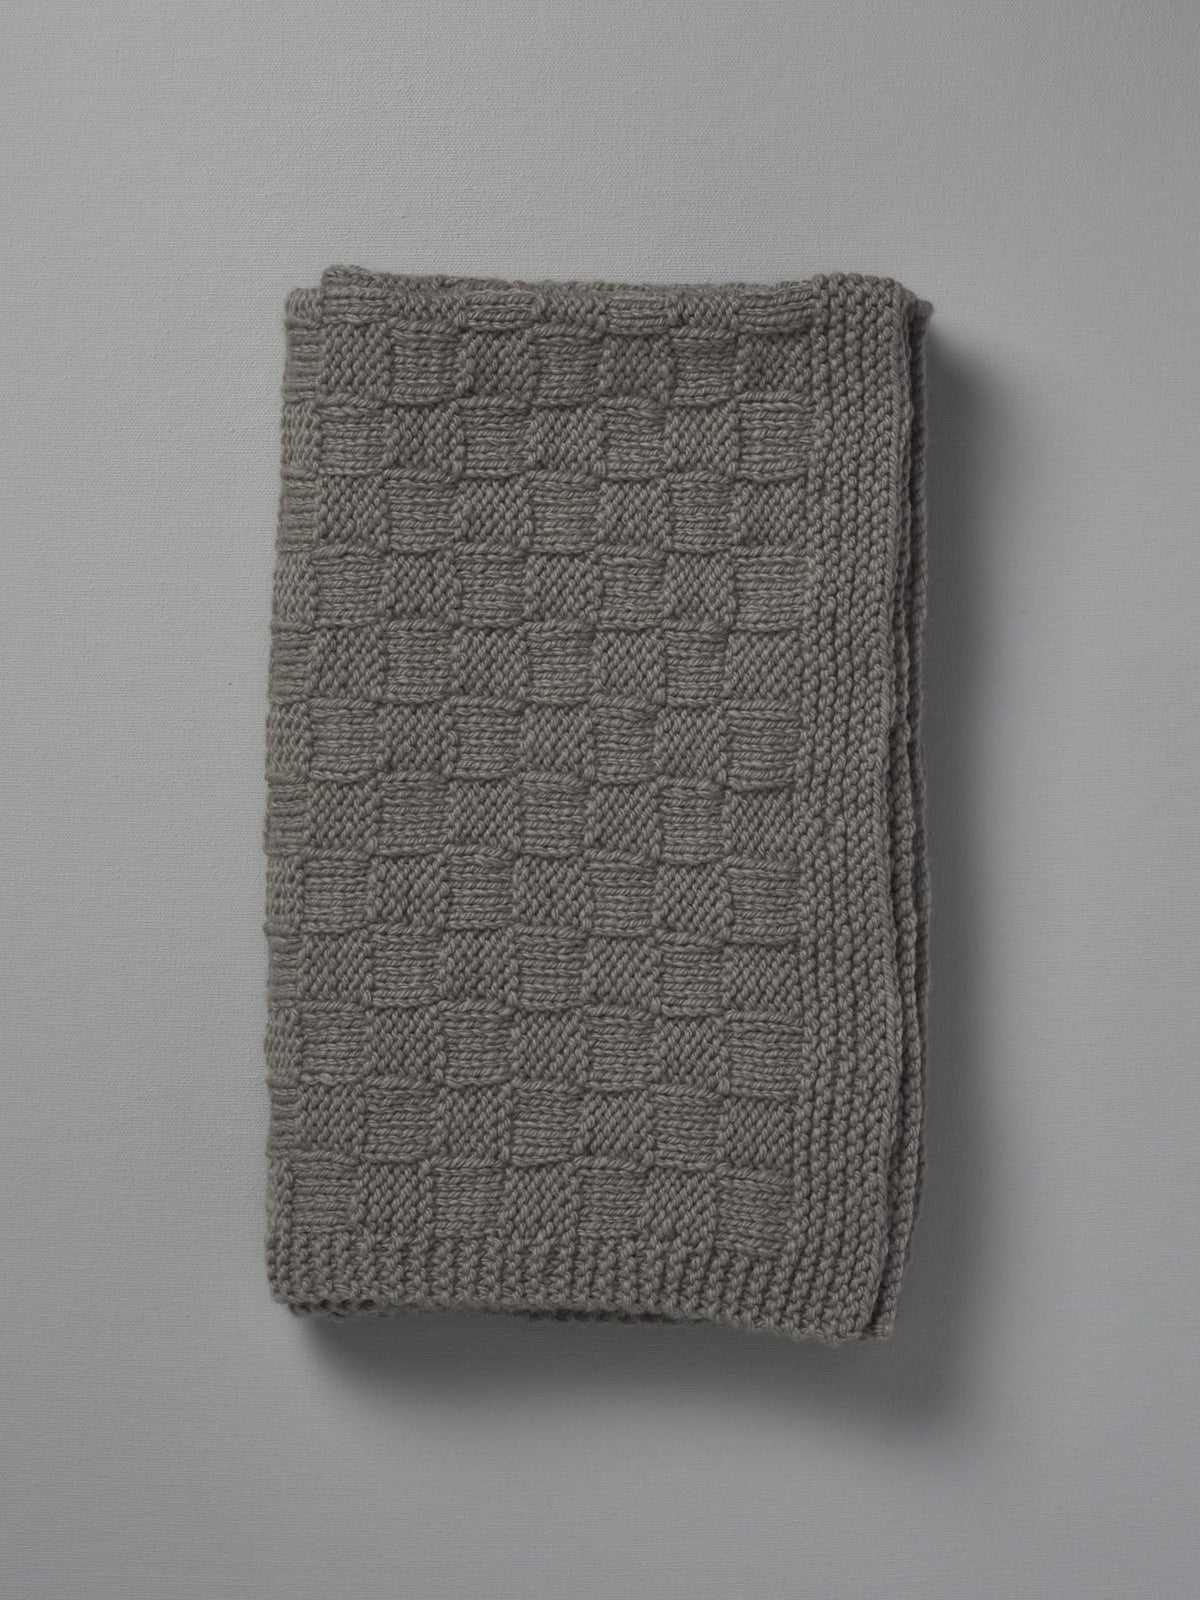 A Weebits Hand Knitted Travel Rug - Mushroom on a white background.